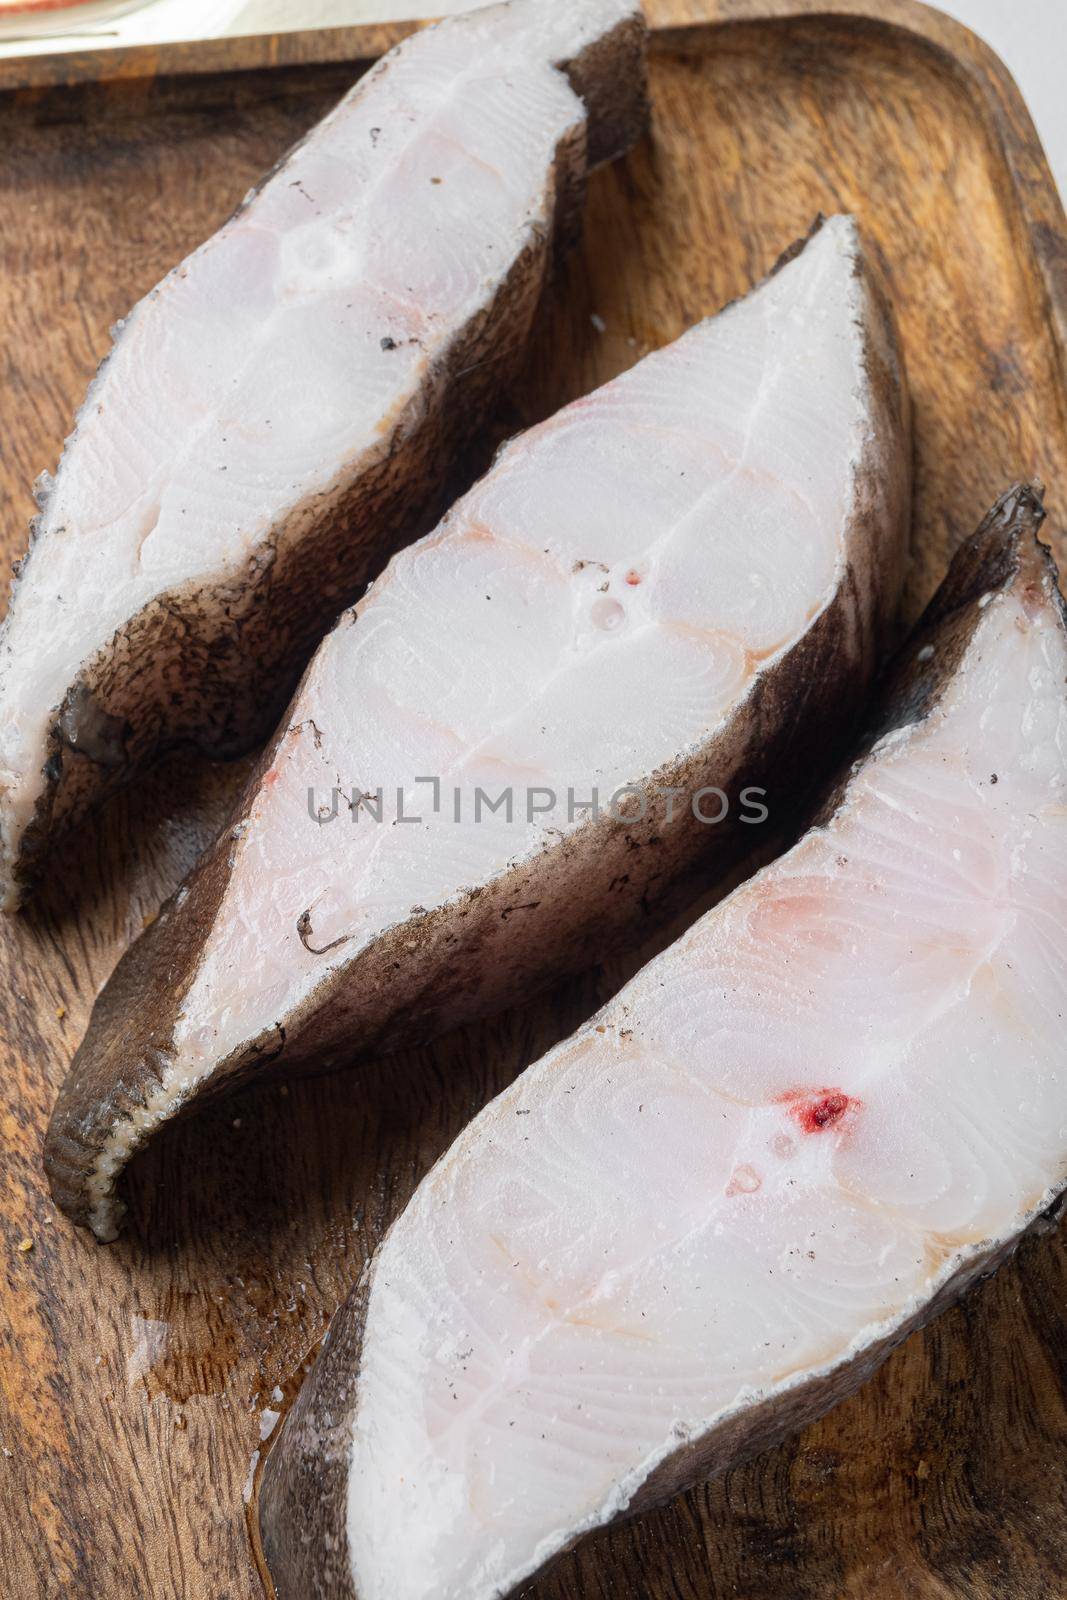 Chilled halibut steaks set, with ingredients and rosemary herbs, on white stone table background